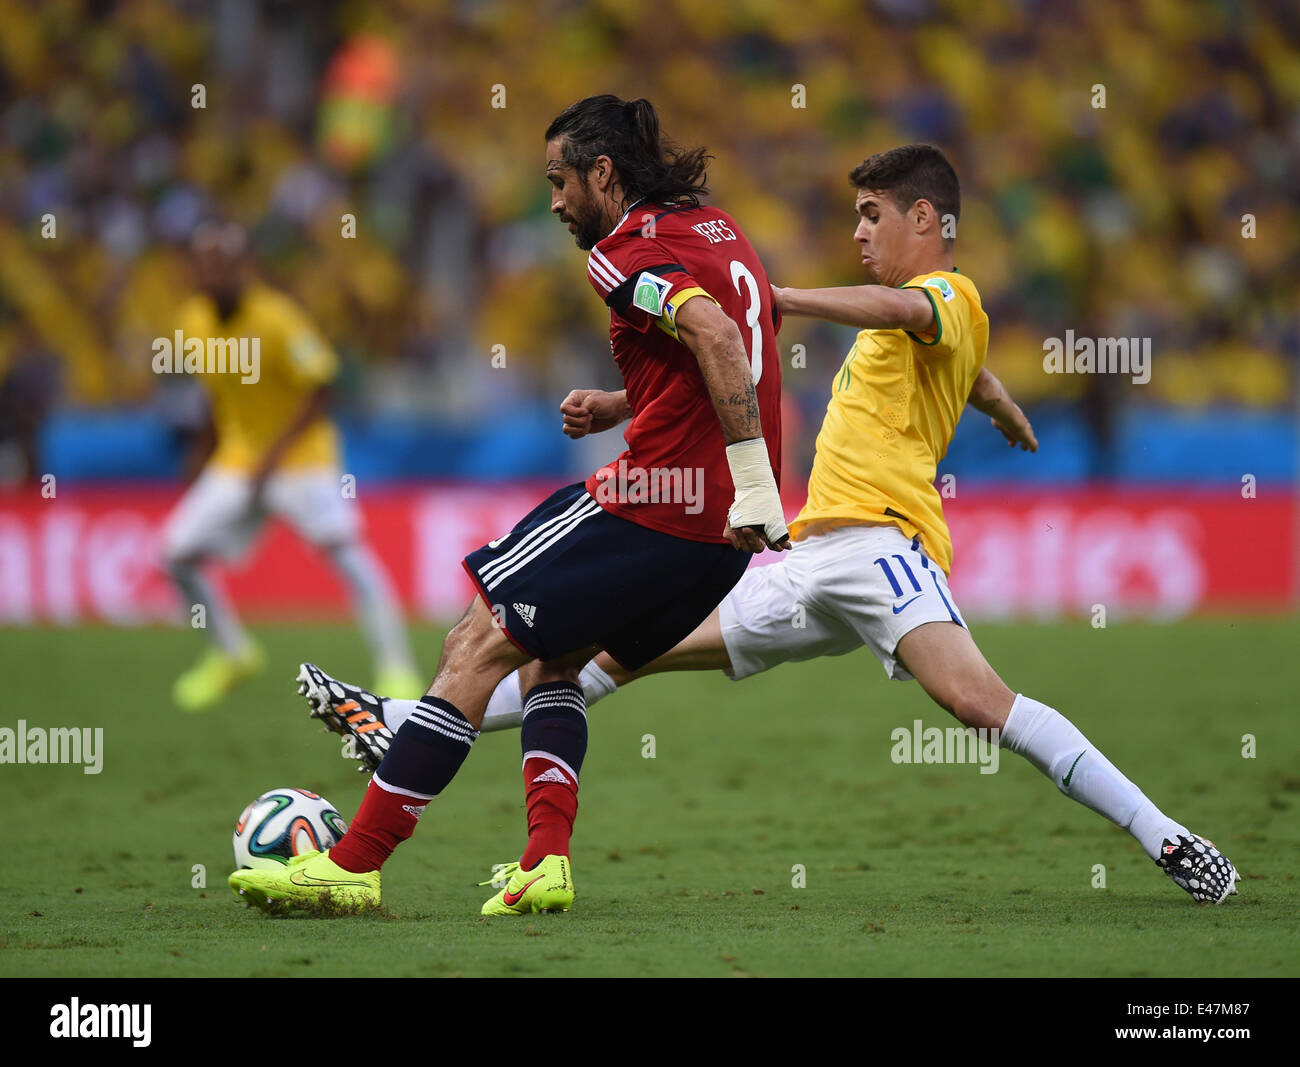 Fortaleza, Brazil. 04th July, 2014. Oscar (R) of Brazil and Mario Yepes of Colombia vie for the ball during the FIFA World Cup 2014 quarter final match soccer between Brazil and Colombia at the Estadio Castelao in Fortaleza, Brazil, 04 July 2014. Photo: Marius Becker/dpa/Alamy Live News Stock Photo